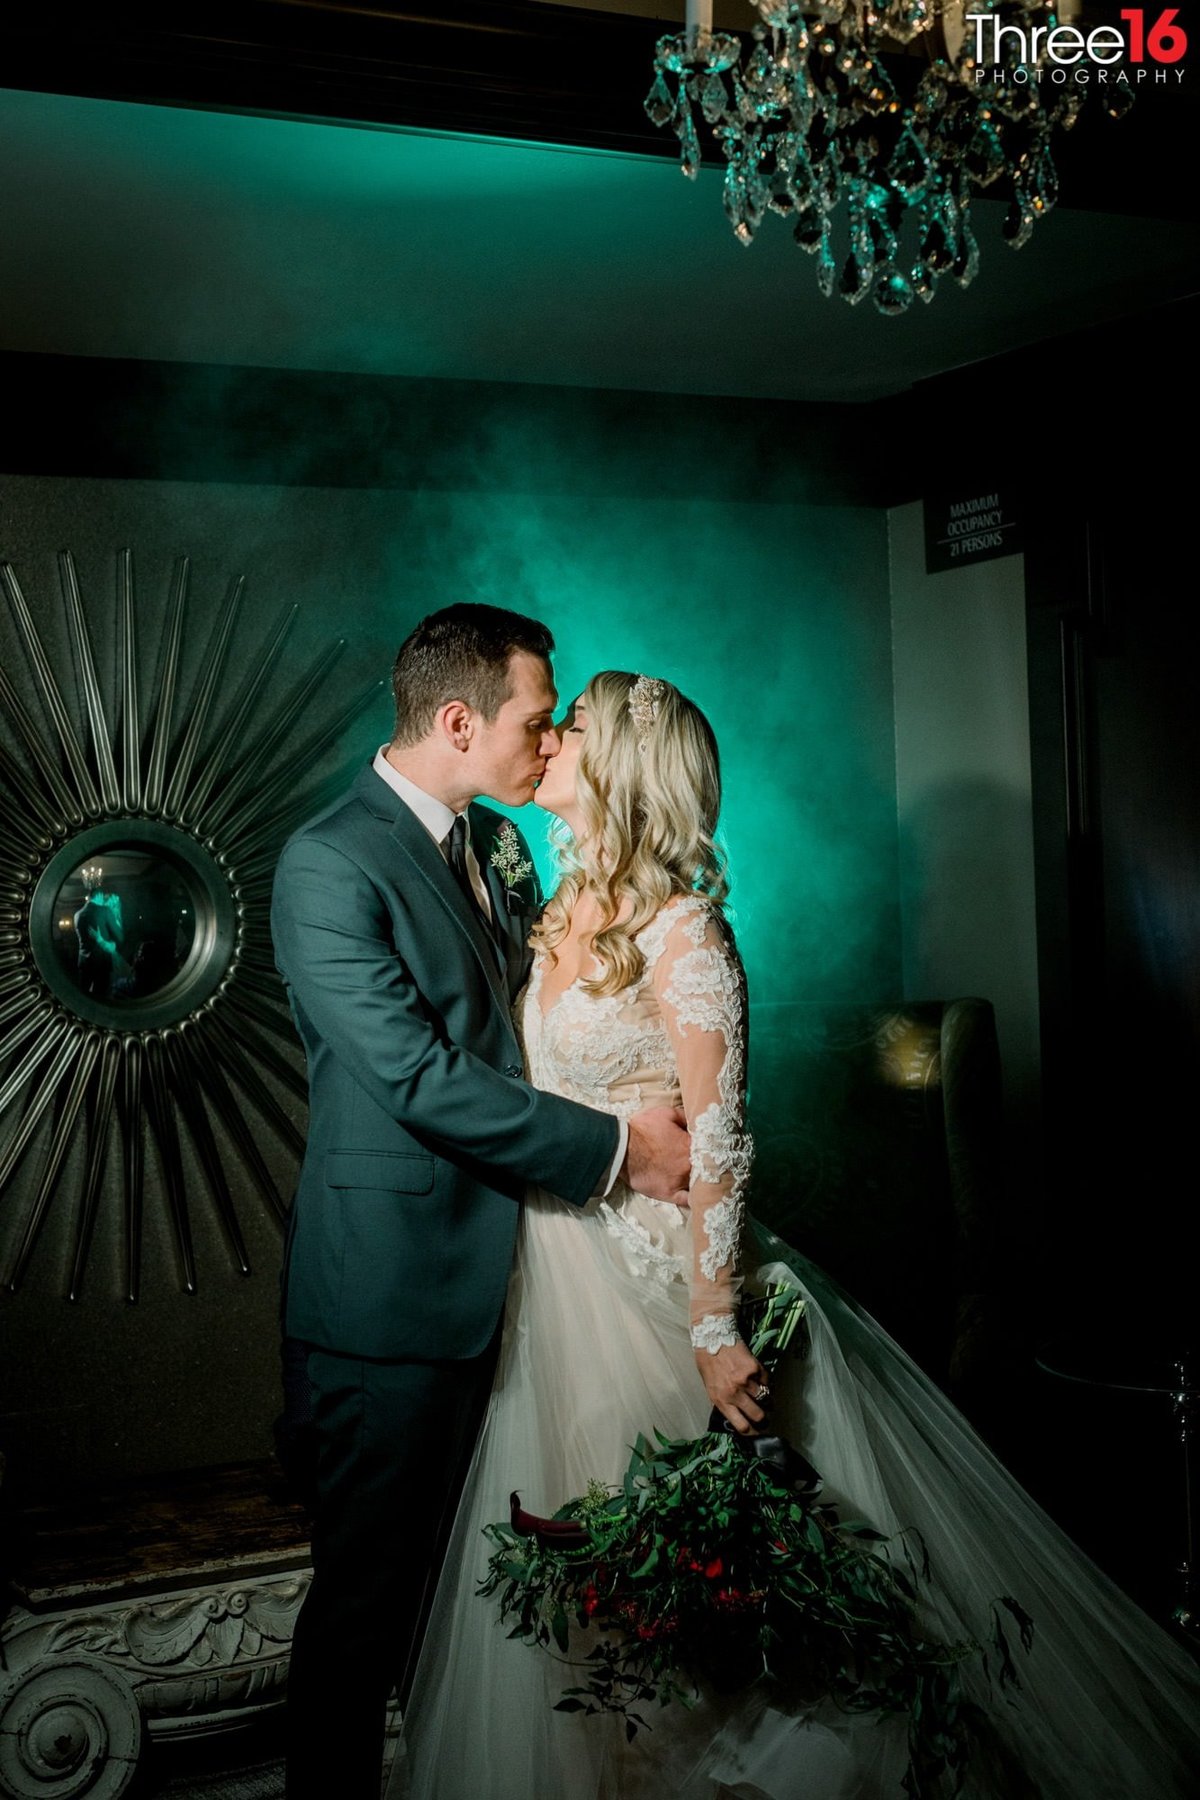 Bride and Groom share a kiss with a green glow behind them